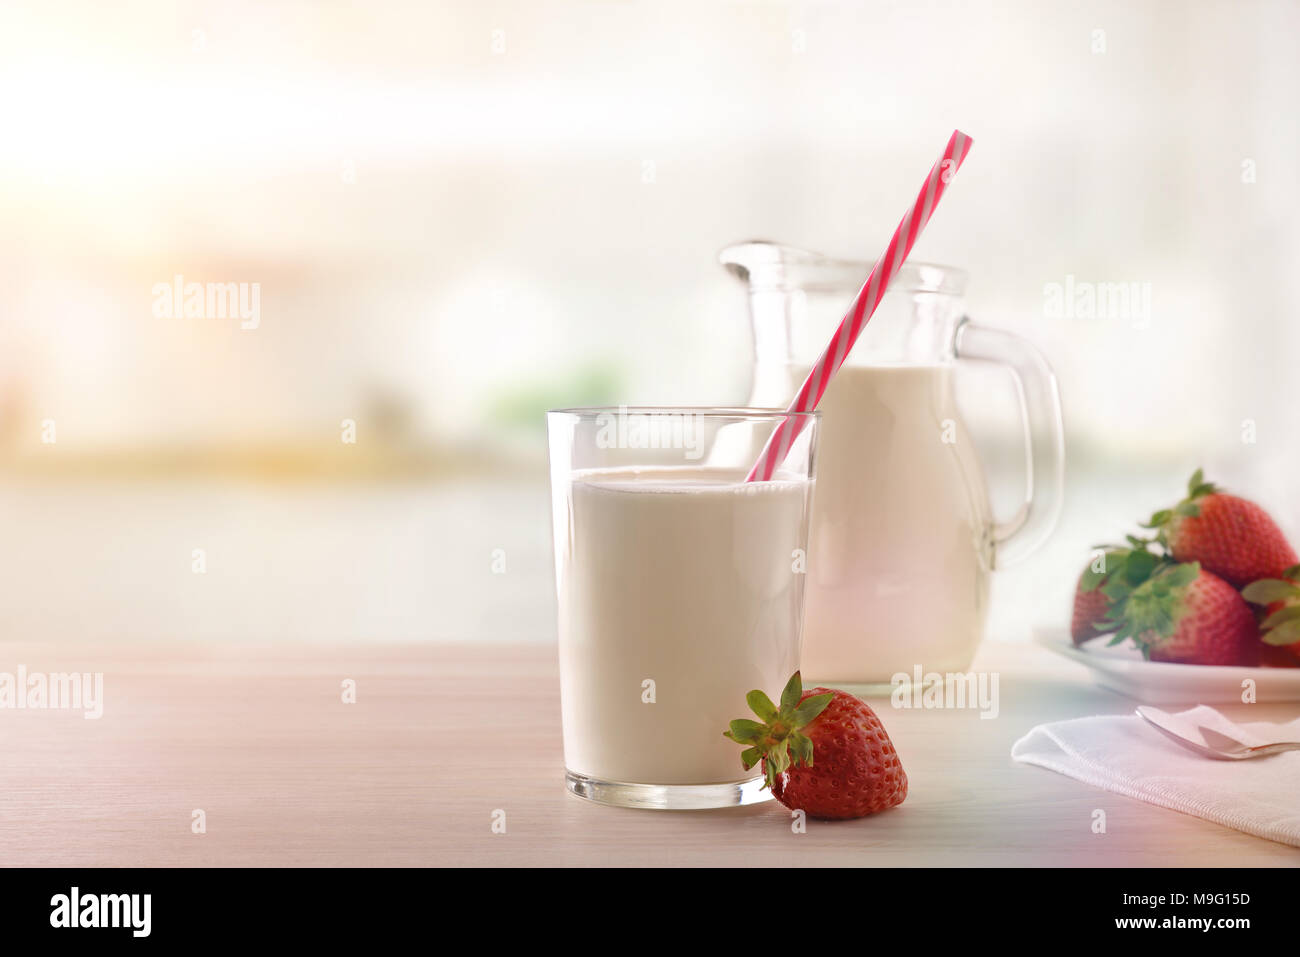 Breakfast milk and strawberries on a white wooden kitchen table. Horizontal composition. Front view Stock Photo